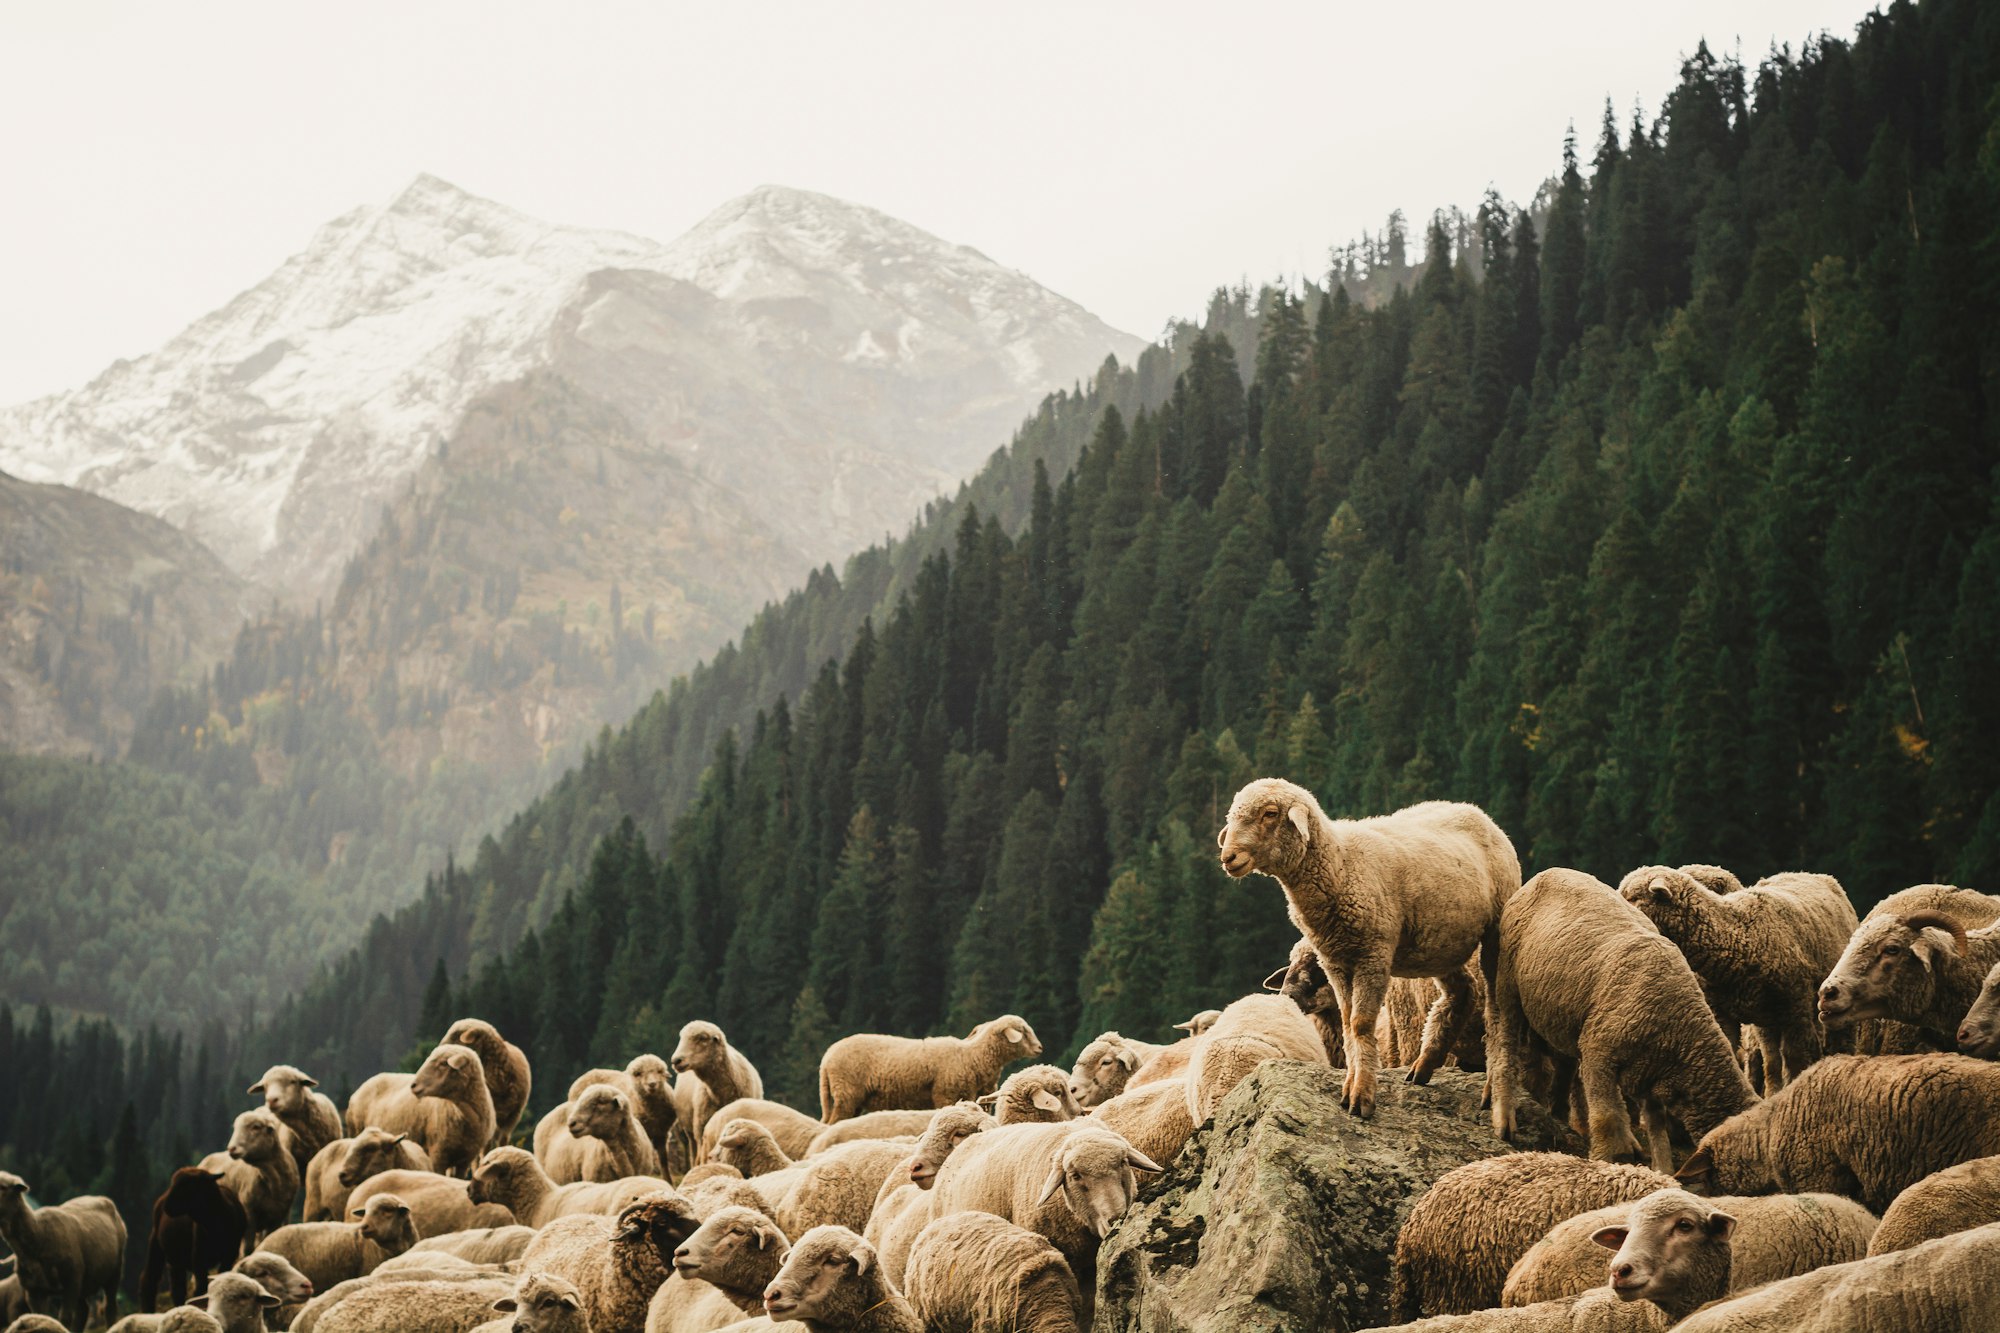 In The Land of Kashmir Valley, Pahalgam. A flock of sheeps